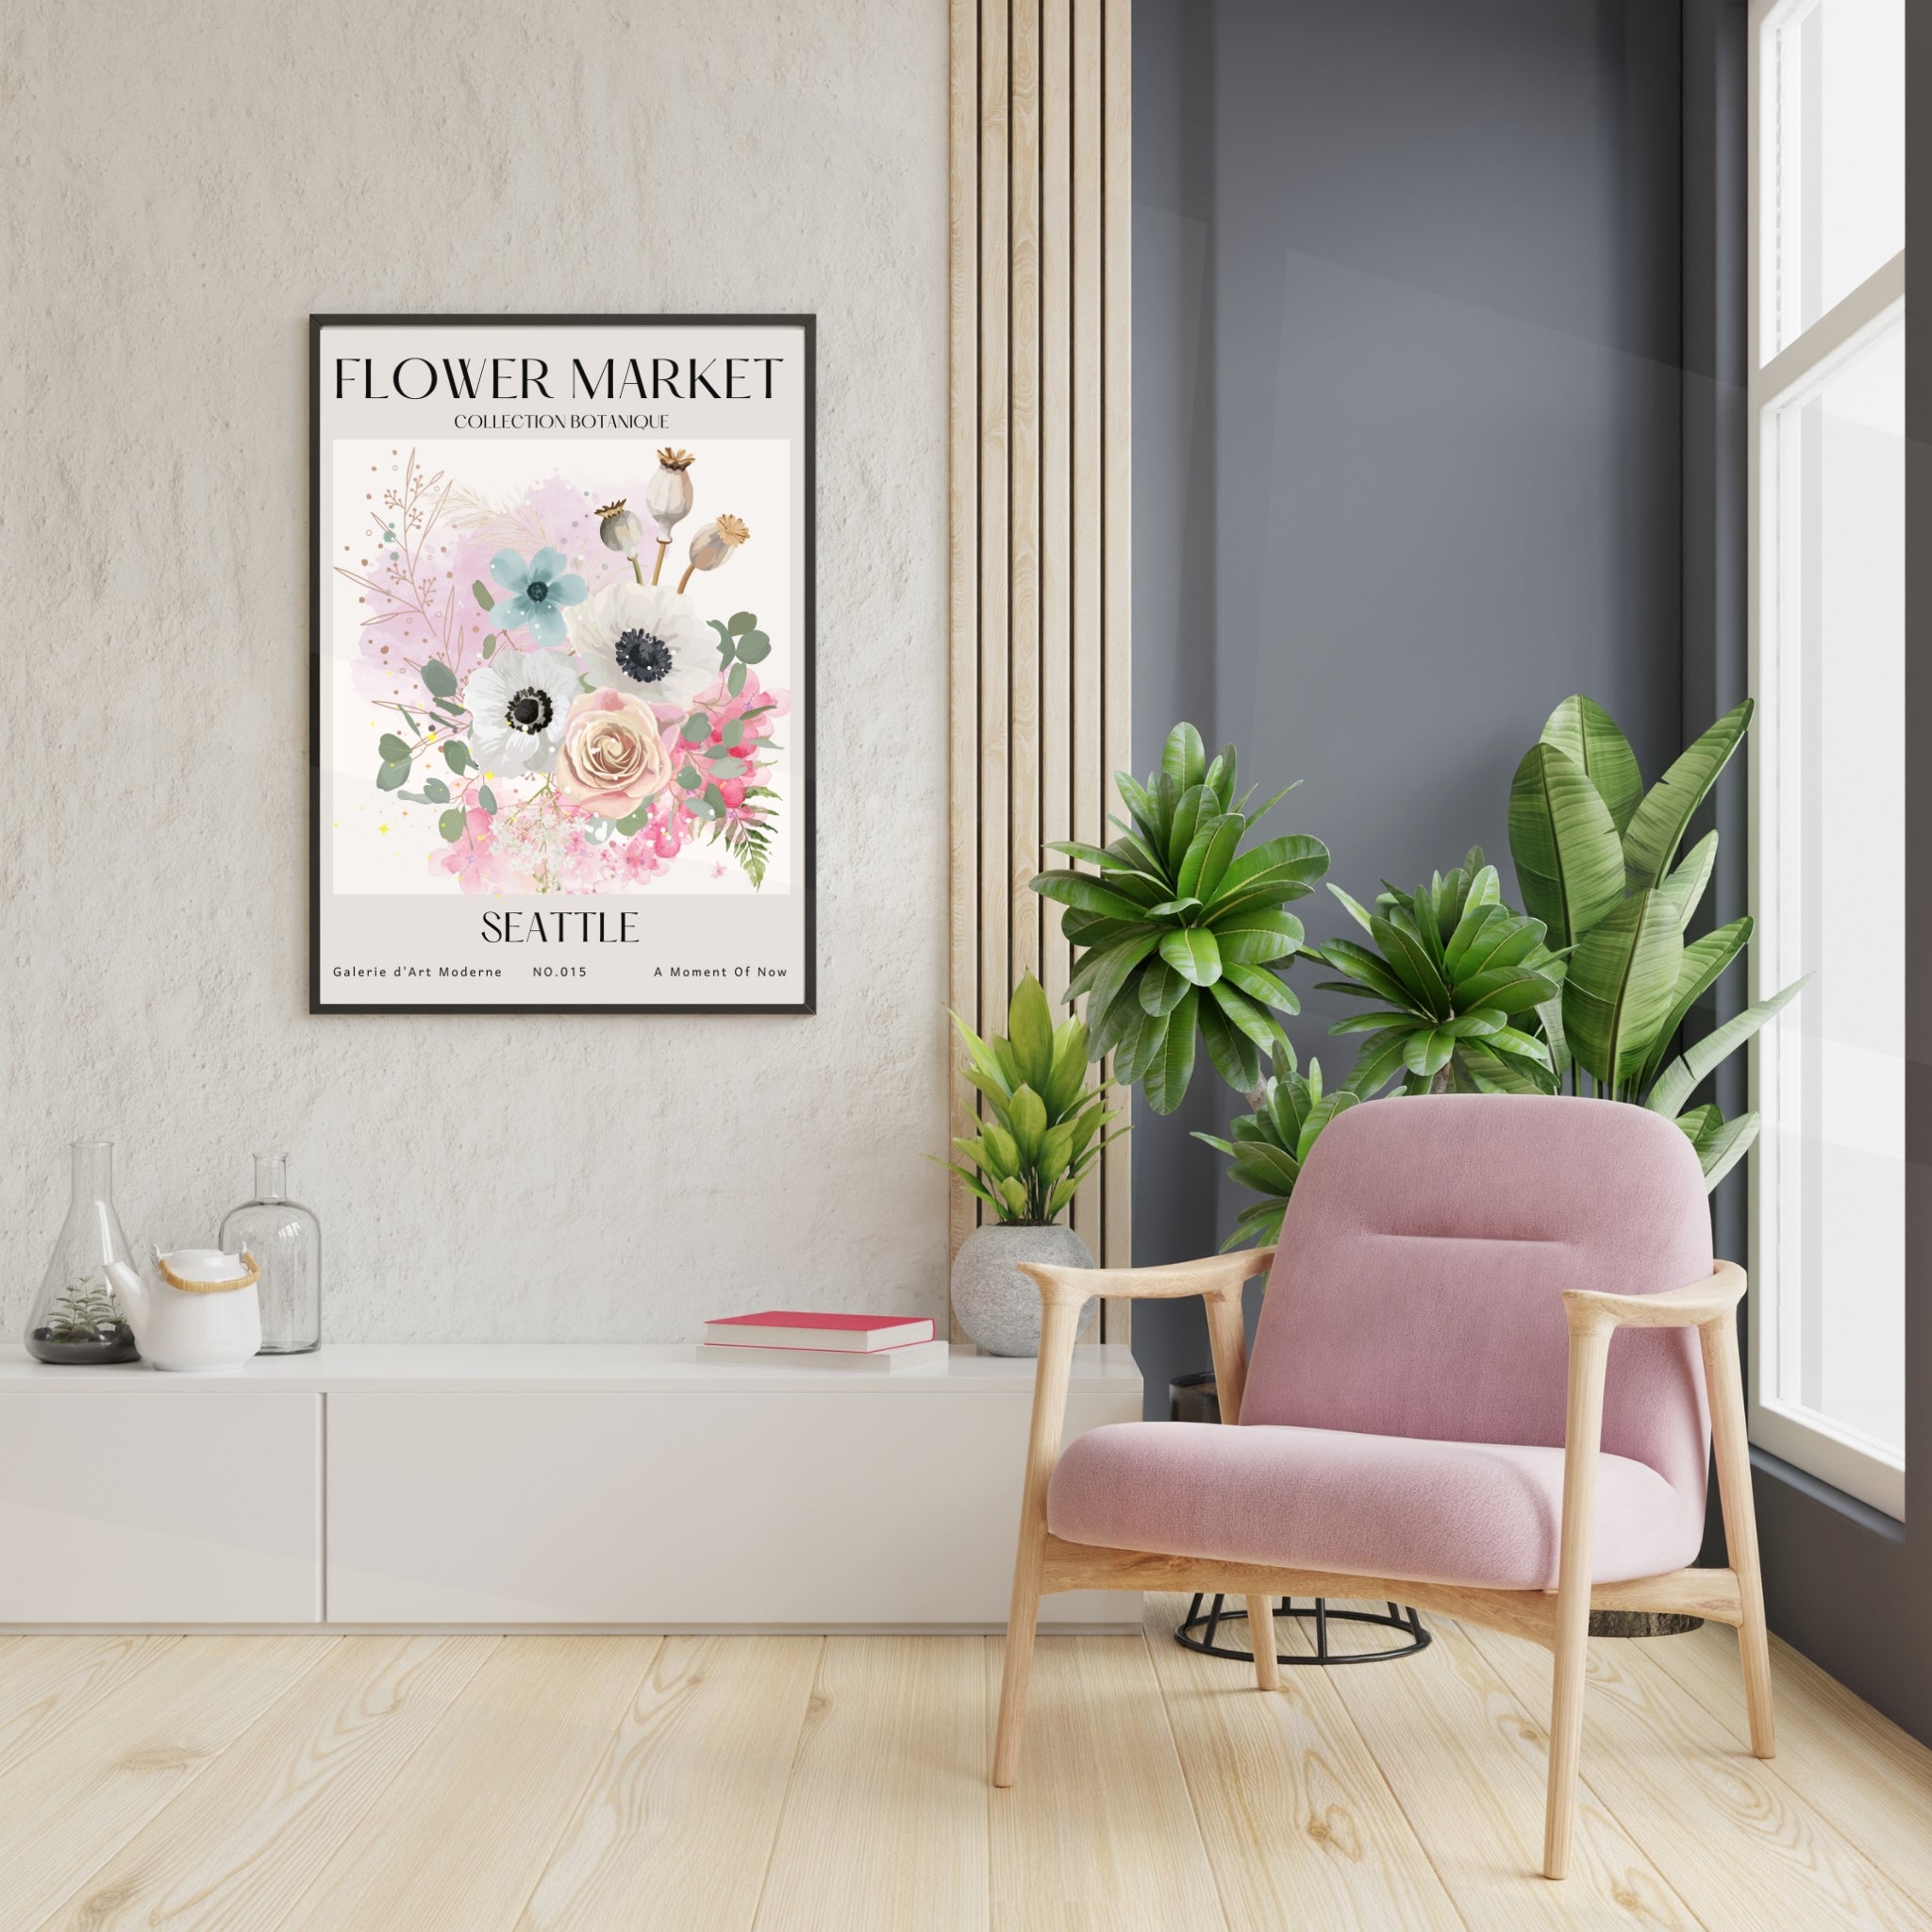 Flower Market Print, 15 Floral Poster Wall Art Decor, Digital Download Posters, Prints, & Visual Artwork A Moment Of Now Women’s Boutique Clothing Online Lifestyle Store